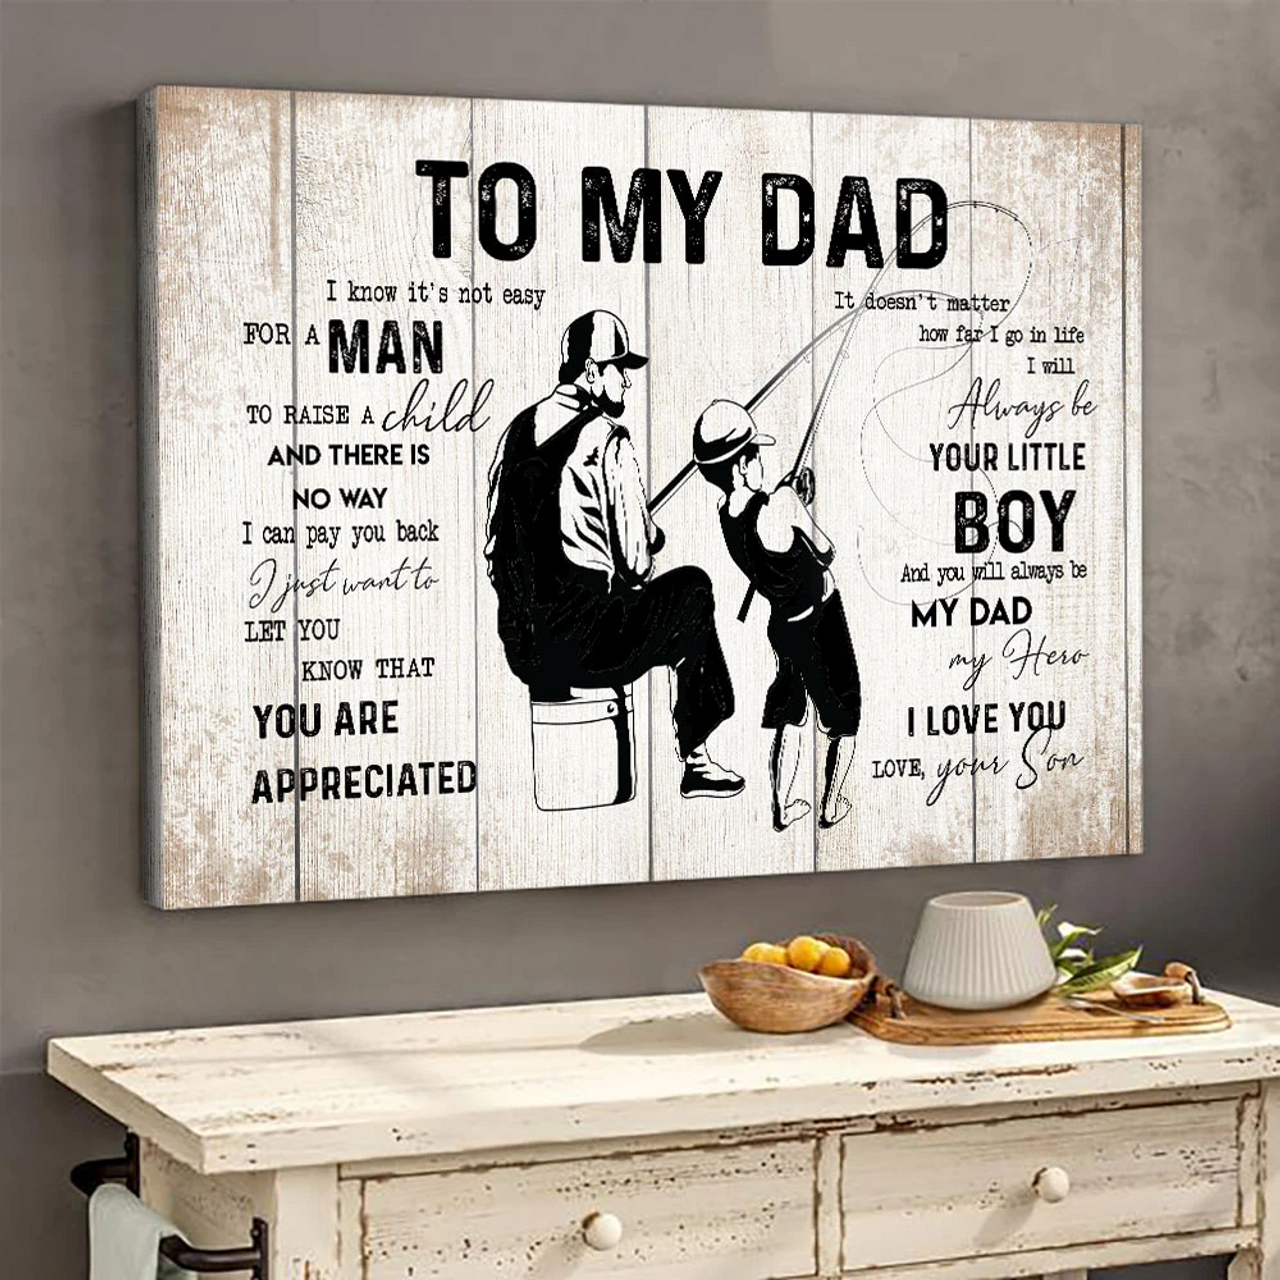 https://cdn11.bigcommerce.com/s-5qu22ar1ud/images/stencil/1280x1280/products/10276/30634/Fishing_Gift_To_My_Dad_From_Son_Fishing_Dad_Fishing_Lover_Canvas_Gift_For_Dad__34729.1611626925.png?c=1?imbypass=on